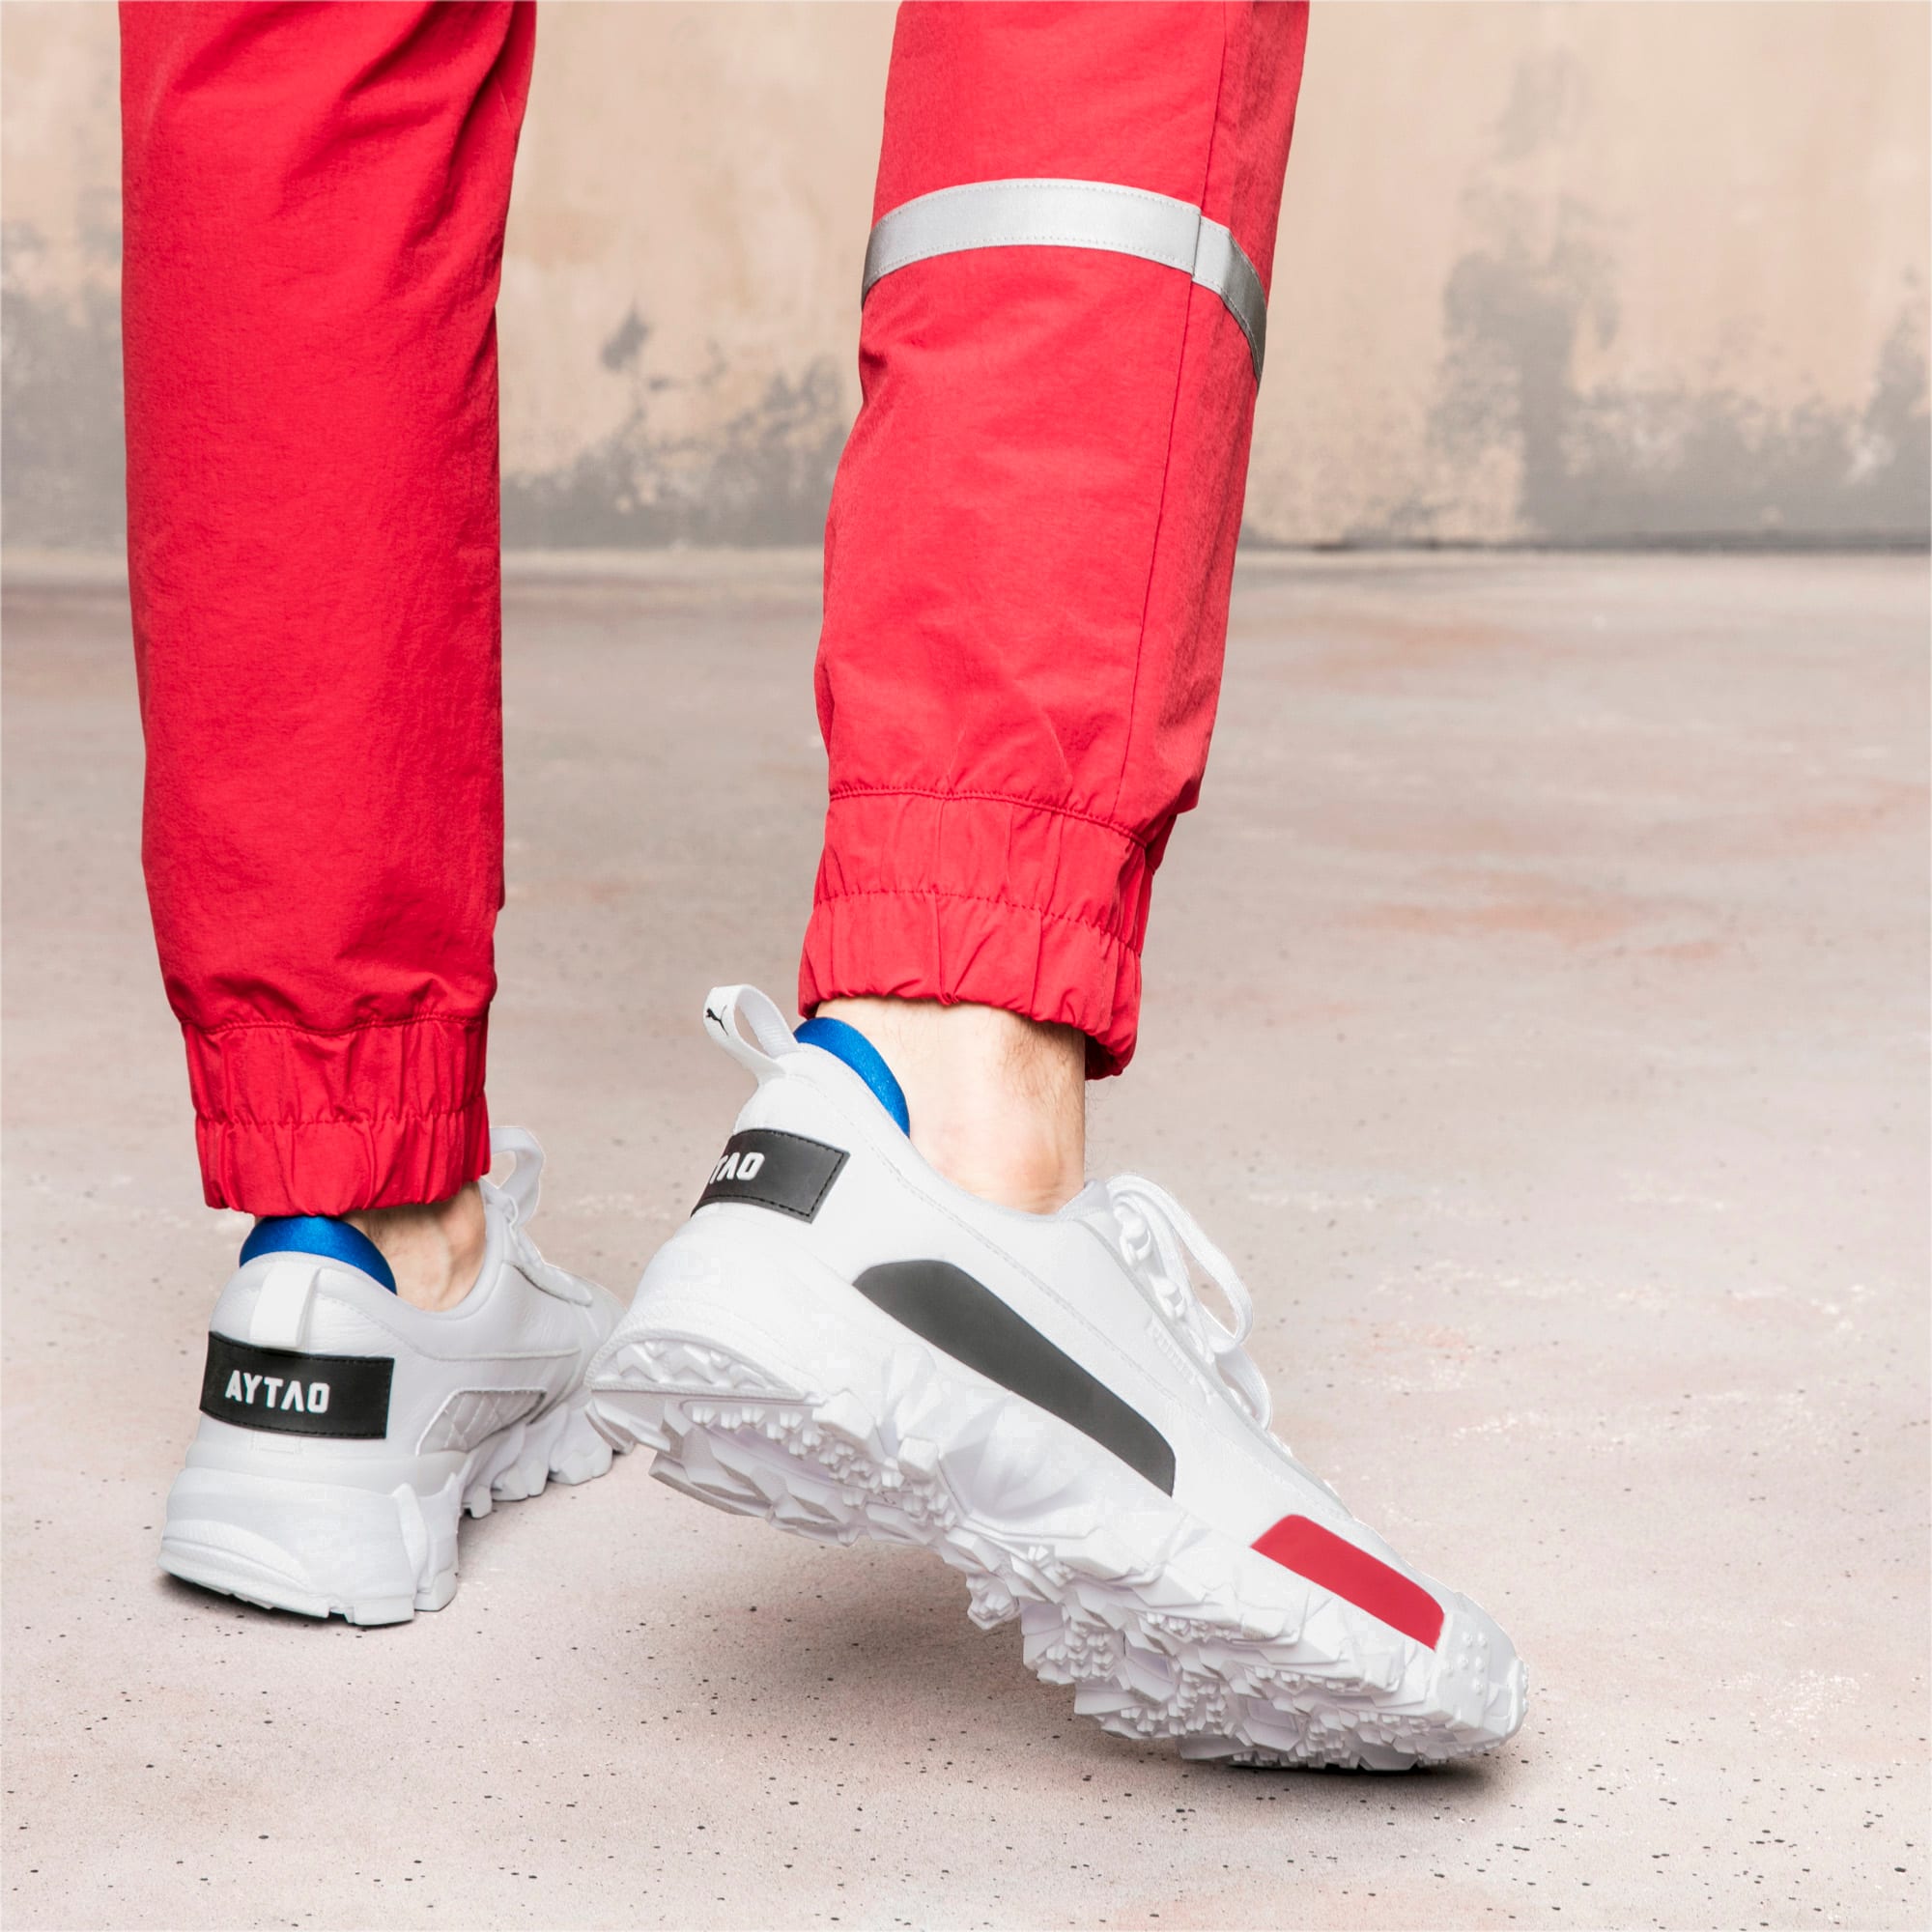 puma x outlaw moscow trailfox sneakers